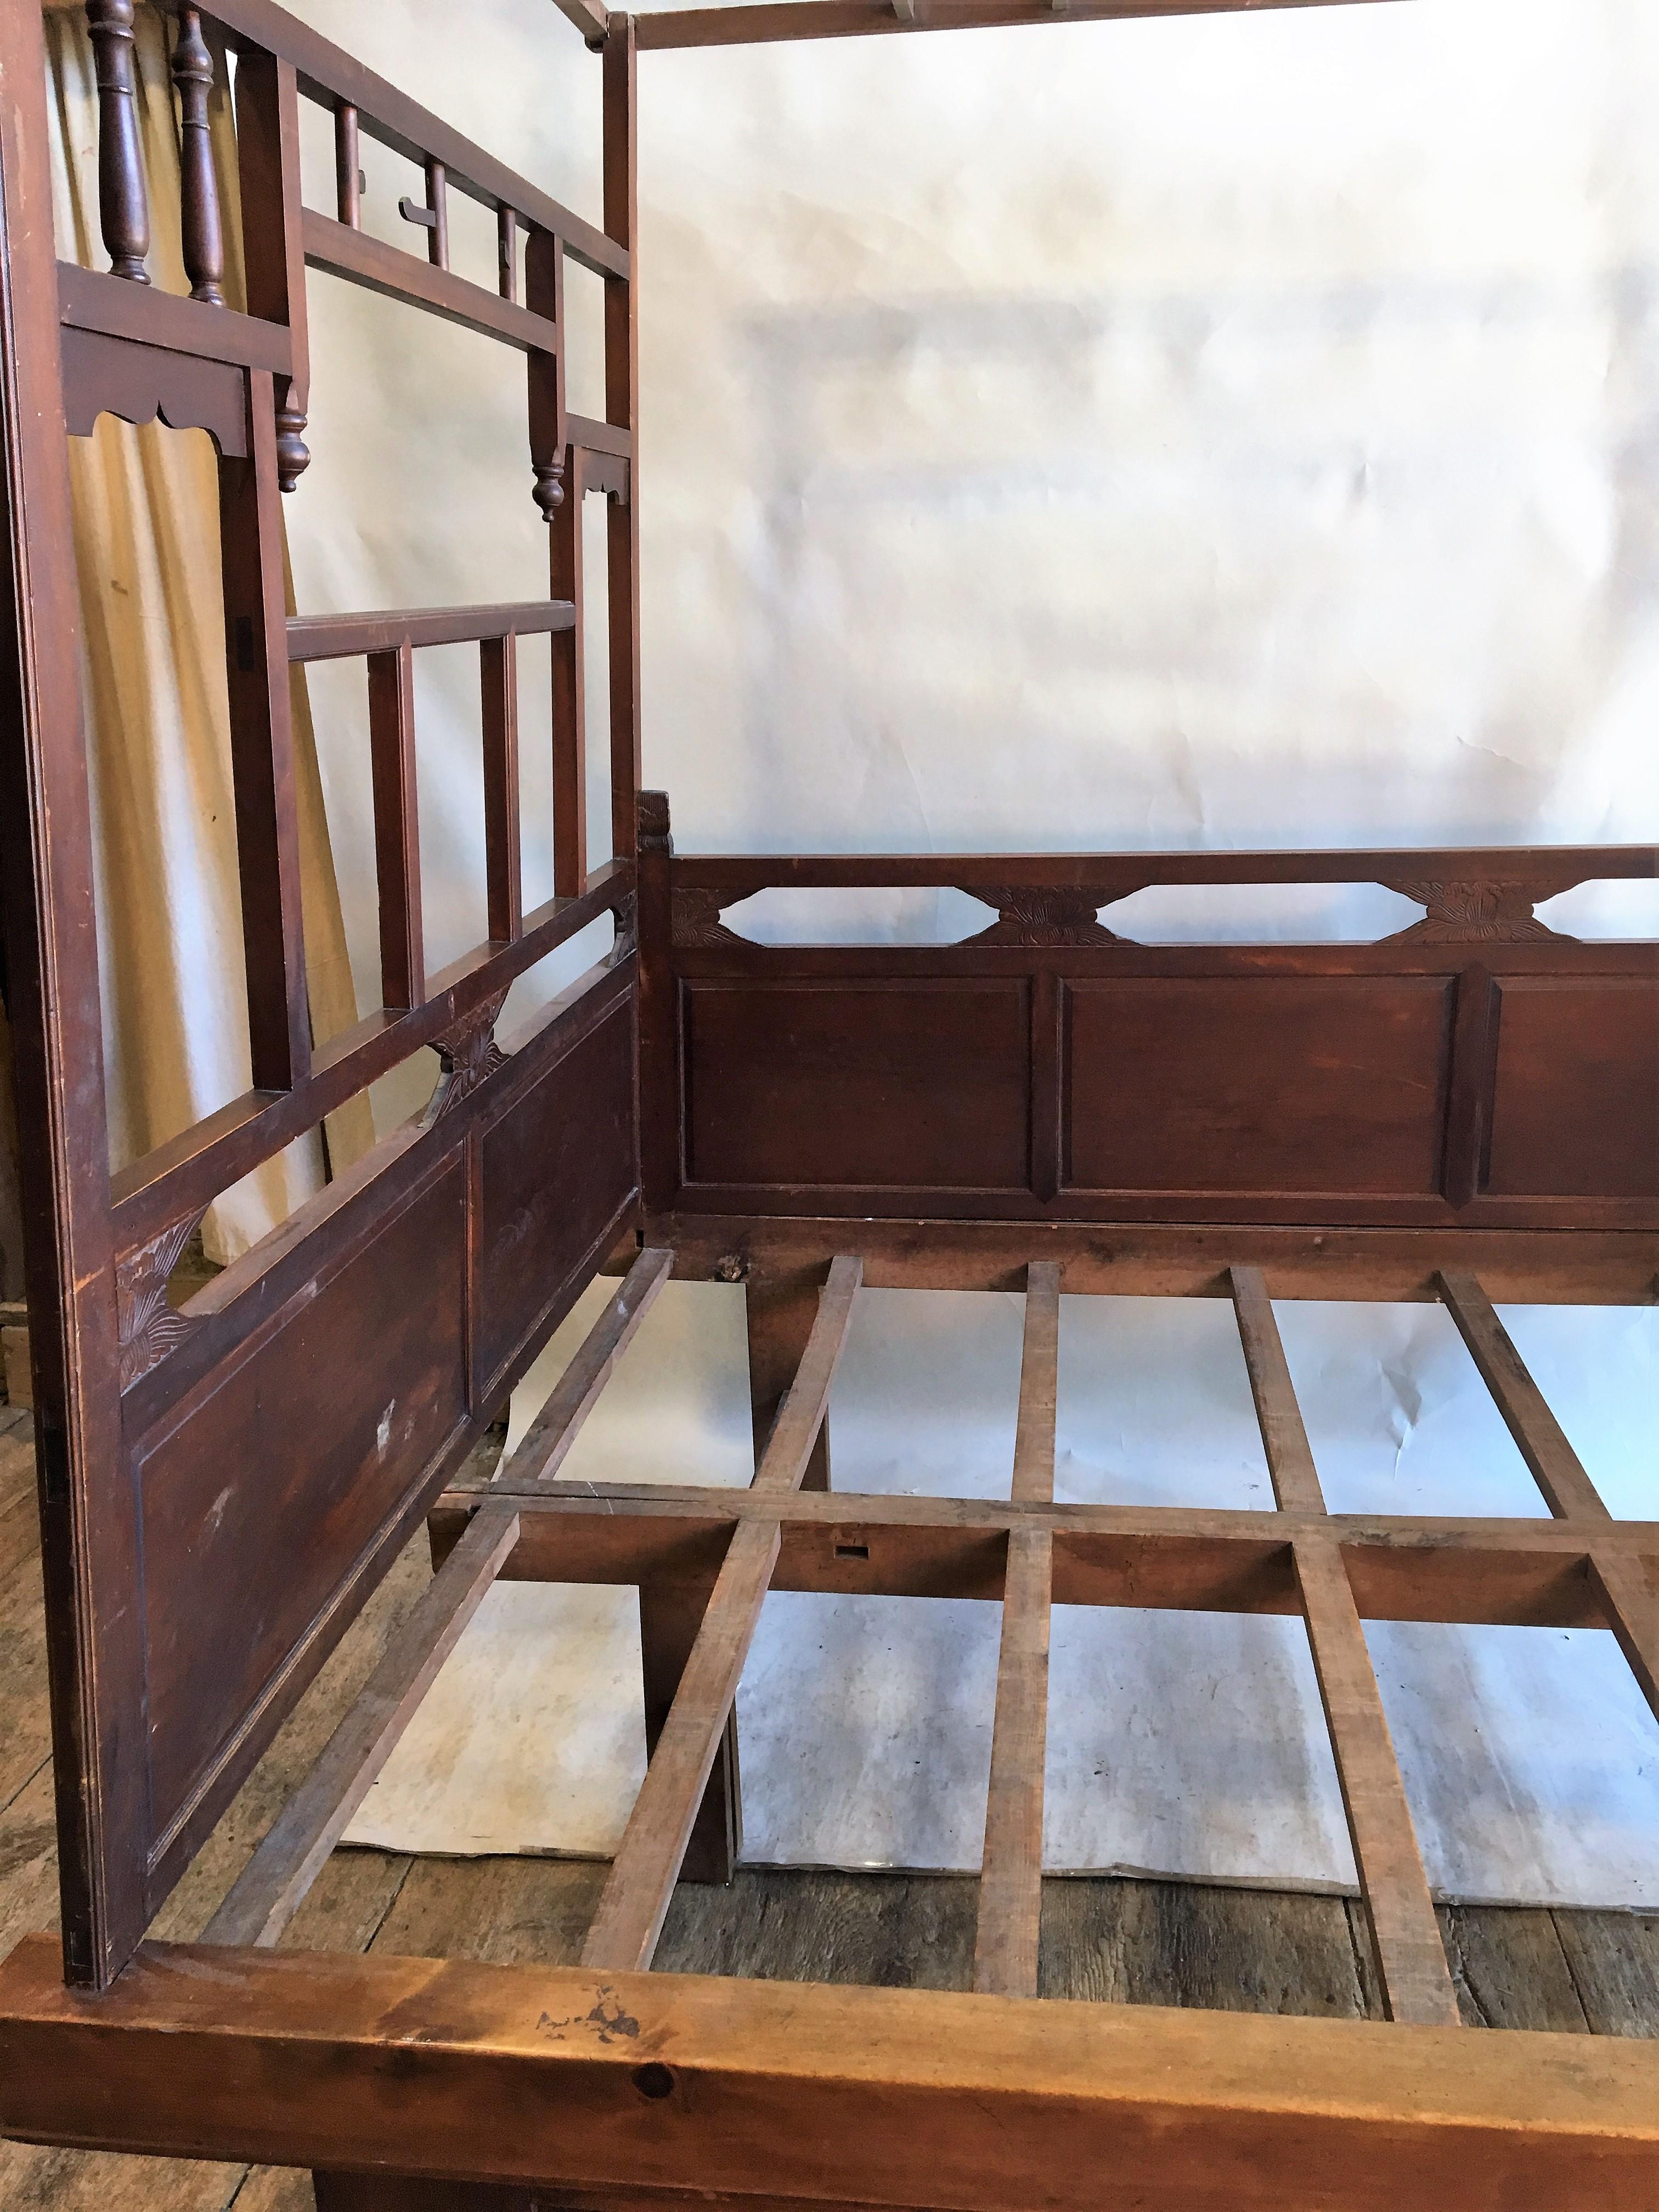 A Chinese wedding bed in carved wood, with lattice canopy supported by side walls with turned wood spindles and carved panels, circa 1890. The bed completely disassembles in minutes and can be easily transported. The base is in 2 halves.